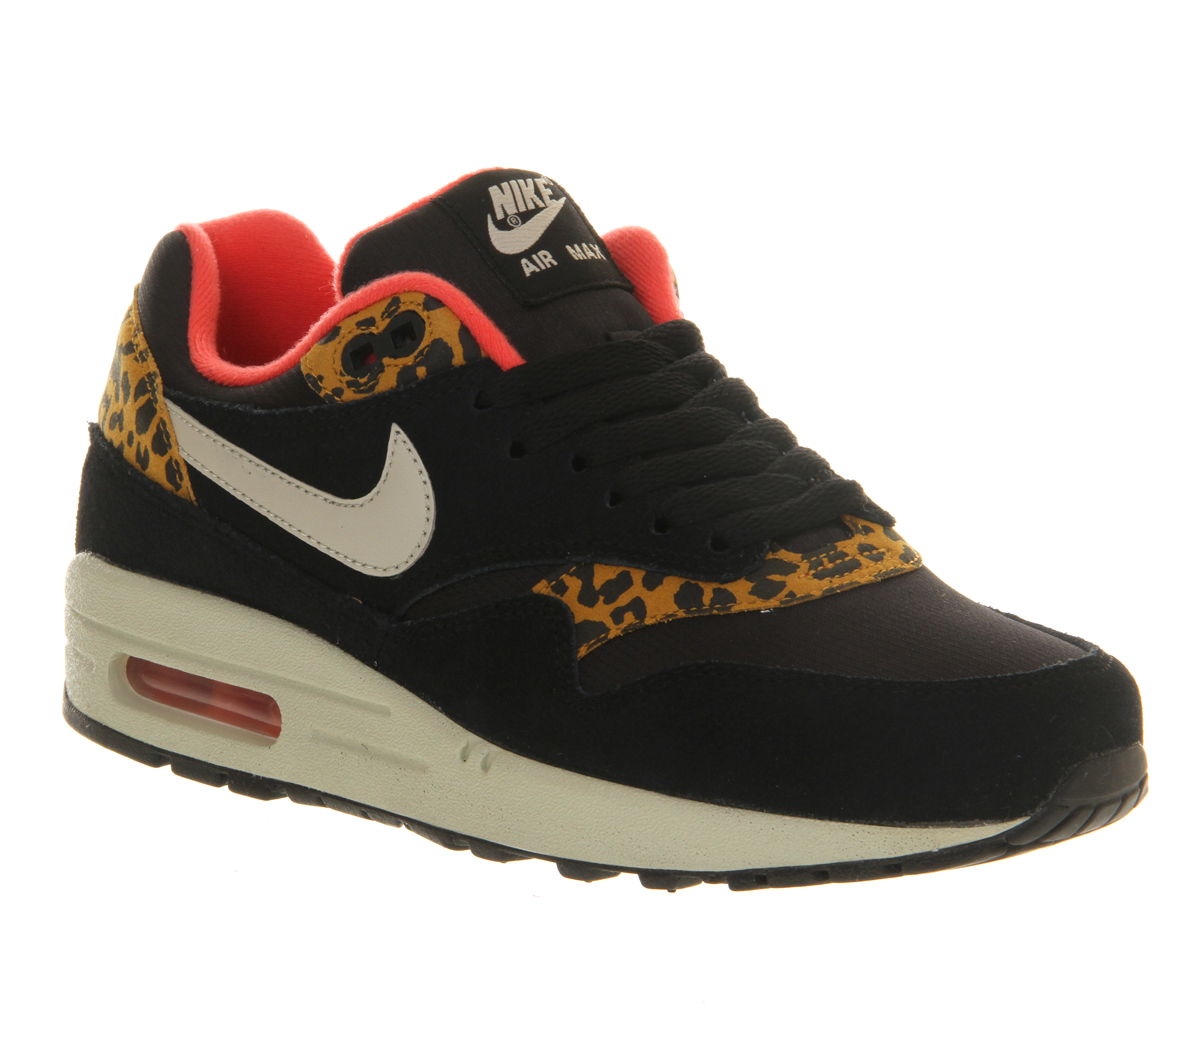 Nike Air Max 1 Black Gold Leopard - Office Girl